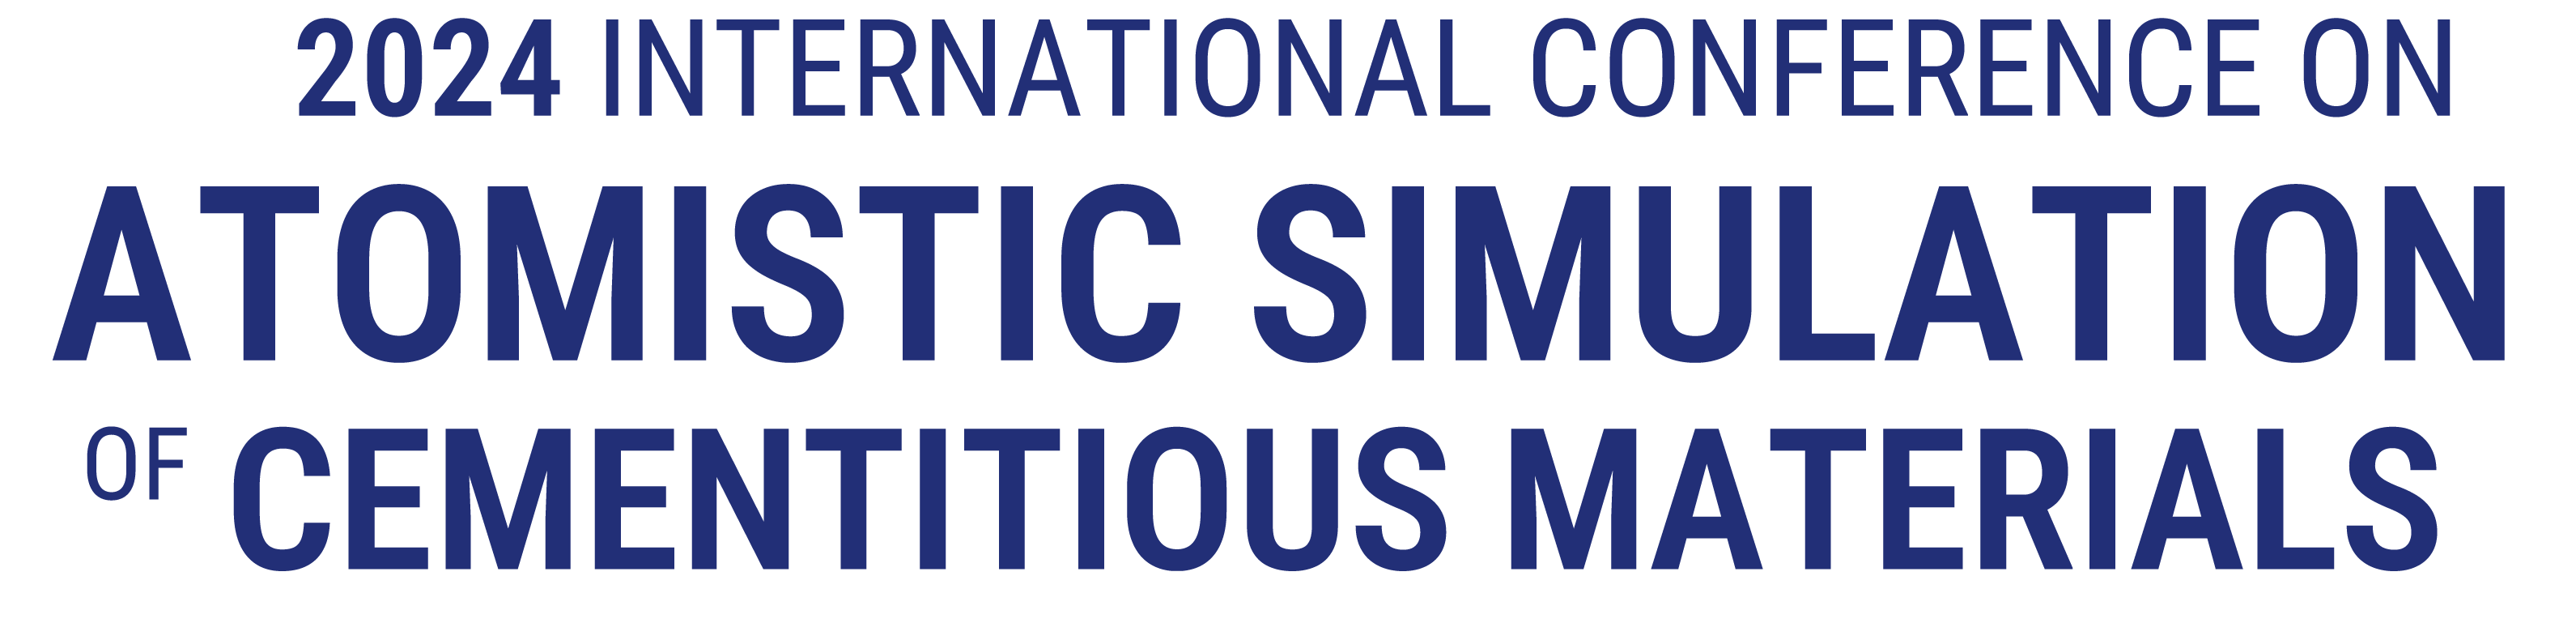 2024 International Conference on Atomistic Simulation of Cementitious Materials